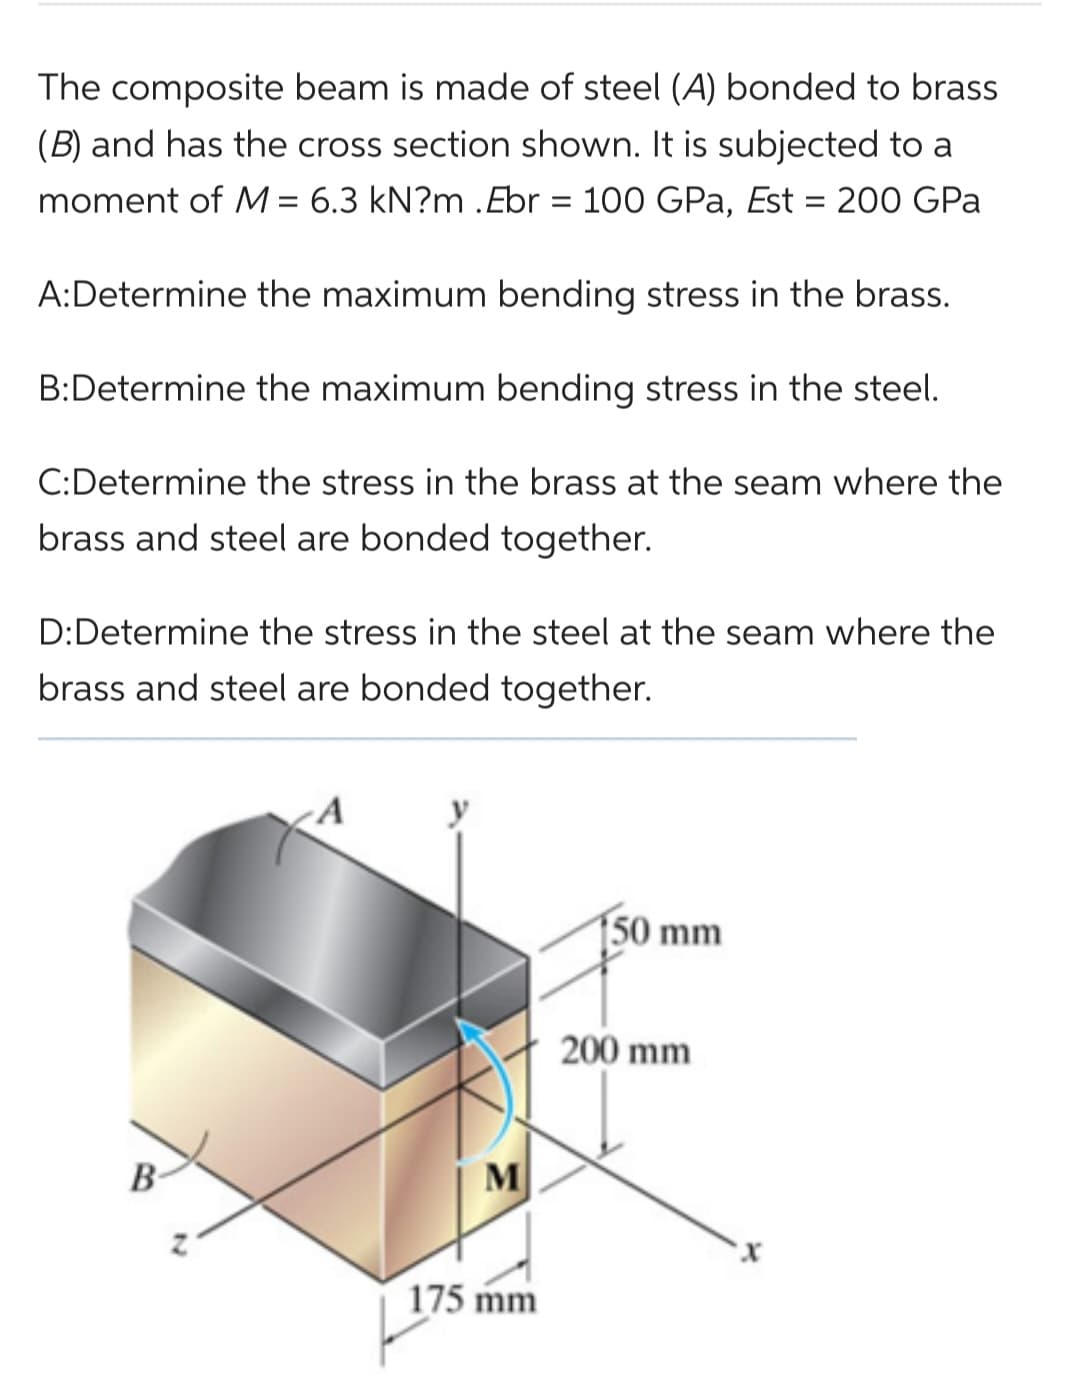 The composite beam is made of steel (A) bonded to brass
(B) and has the cross section shown. It is subjected to a
moment of M = 6.3 kN?m .Ebr = 100 GPa, Est = 200 GPa
A: Determine the maximum bending stress in the brass.
B:Determine the maximum bending stress in the steel.
C: Determine the stress in the brass at the seam where the
brass and steel are bonded together.
D:Determine the stress in the steel at the seam where the
brass and steel are bonded together.
B
M
175 mm
150 mm
200 mm